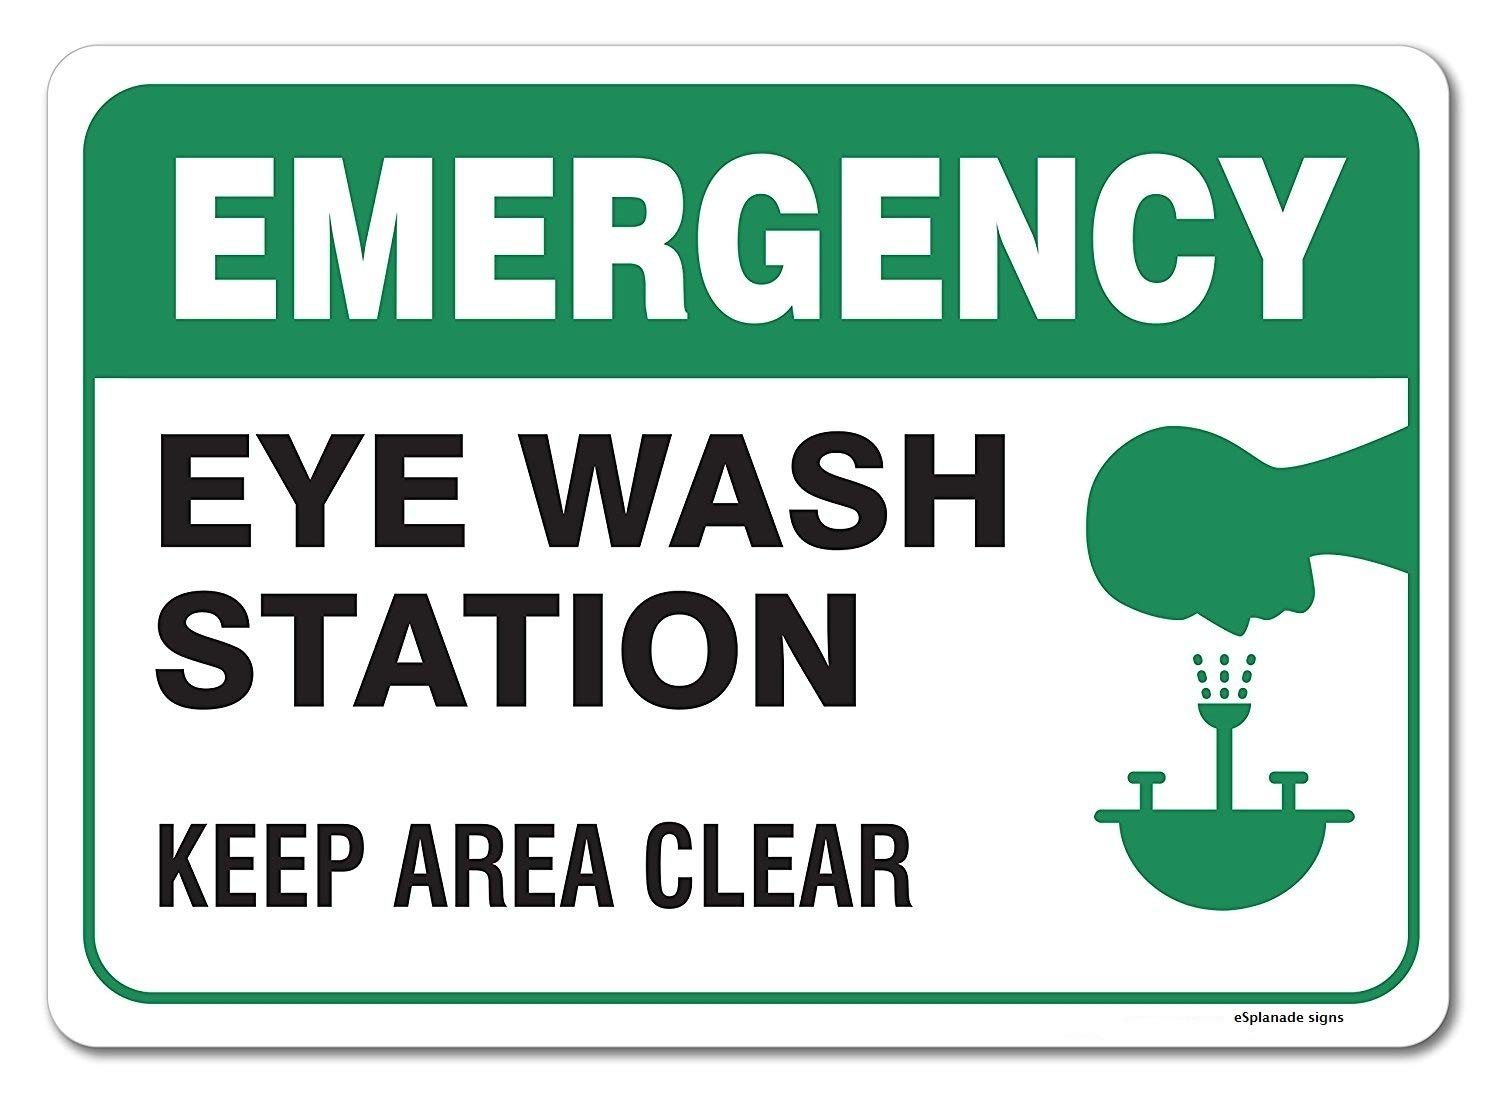 esplanade-emergency-eye-wash-station-sign-sticker-decal-easy-to-mount-weather-resistant-long